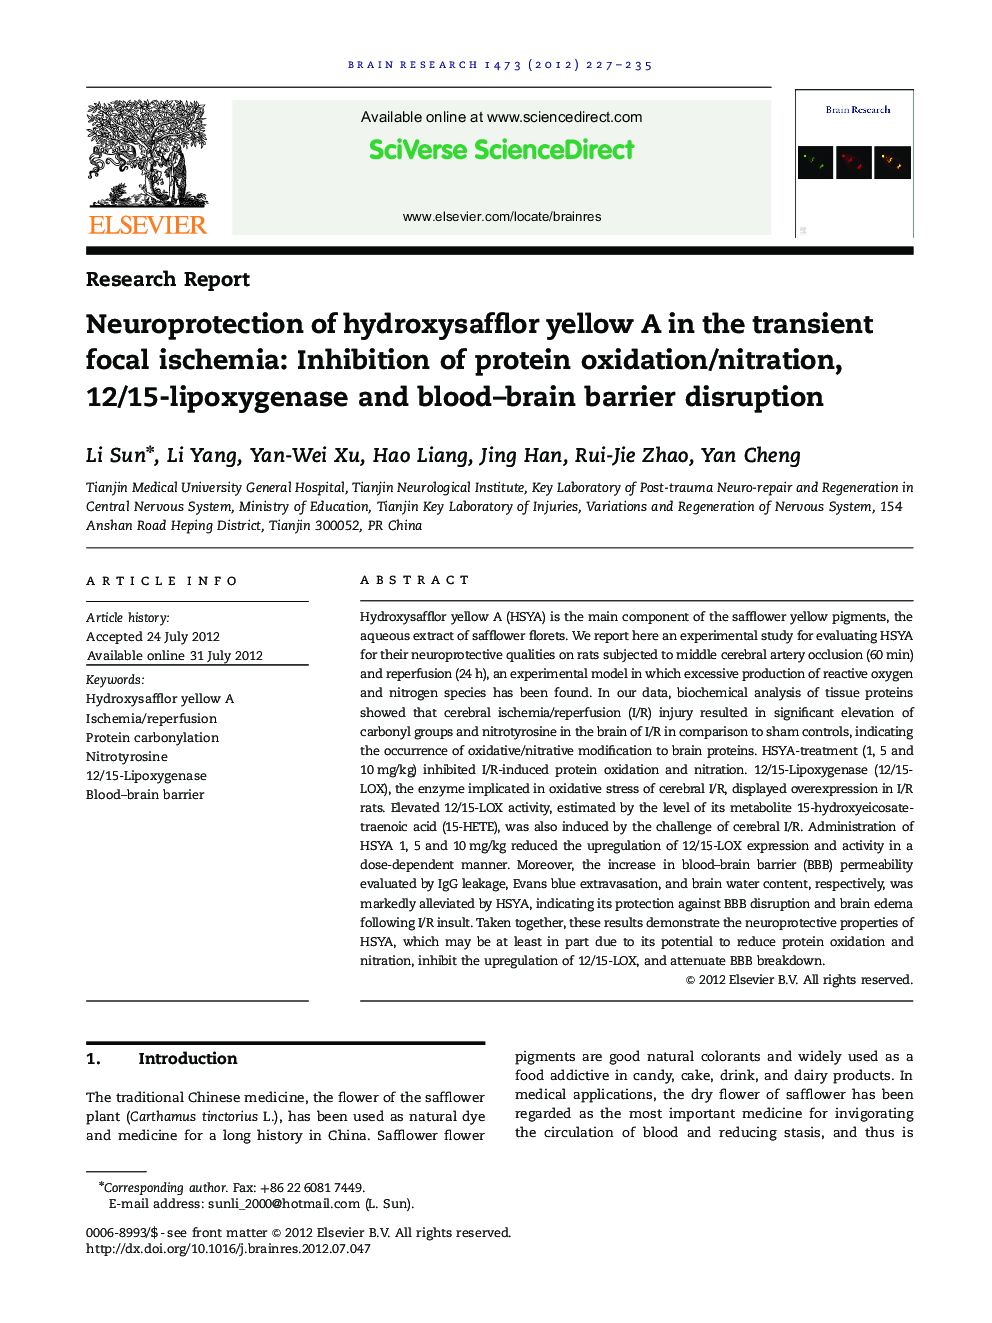 Neuroprotection of hydroxysafflor yellow A in the transient focal ischemia: Inhibition of protein oxidation/nitration, 12/15-lipoxygenase and blood–brain barrier disruption